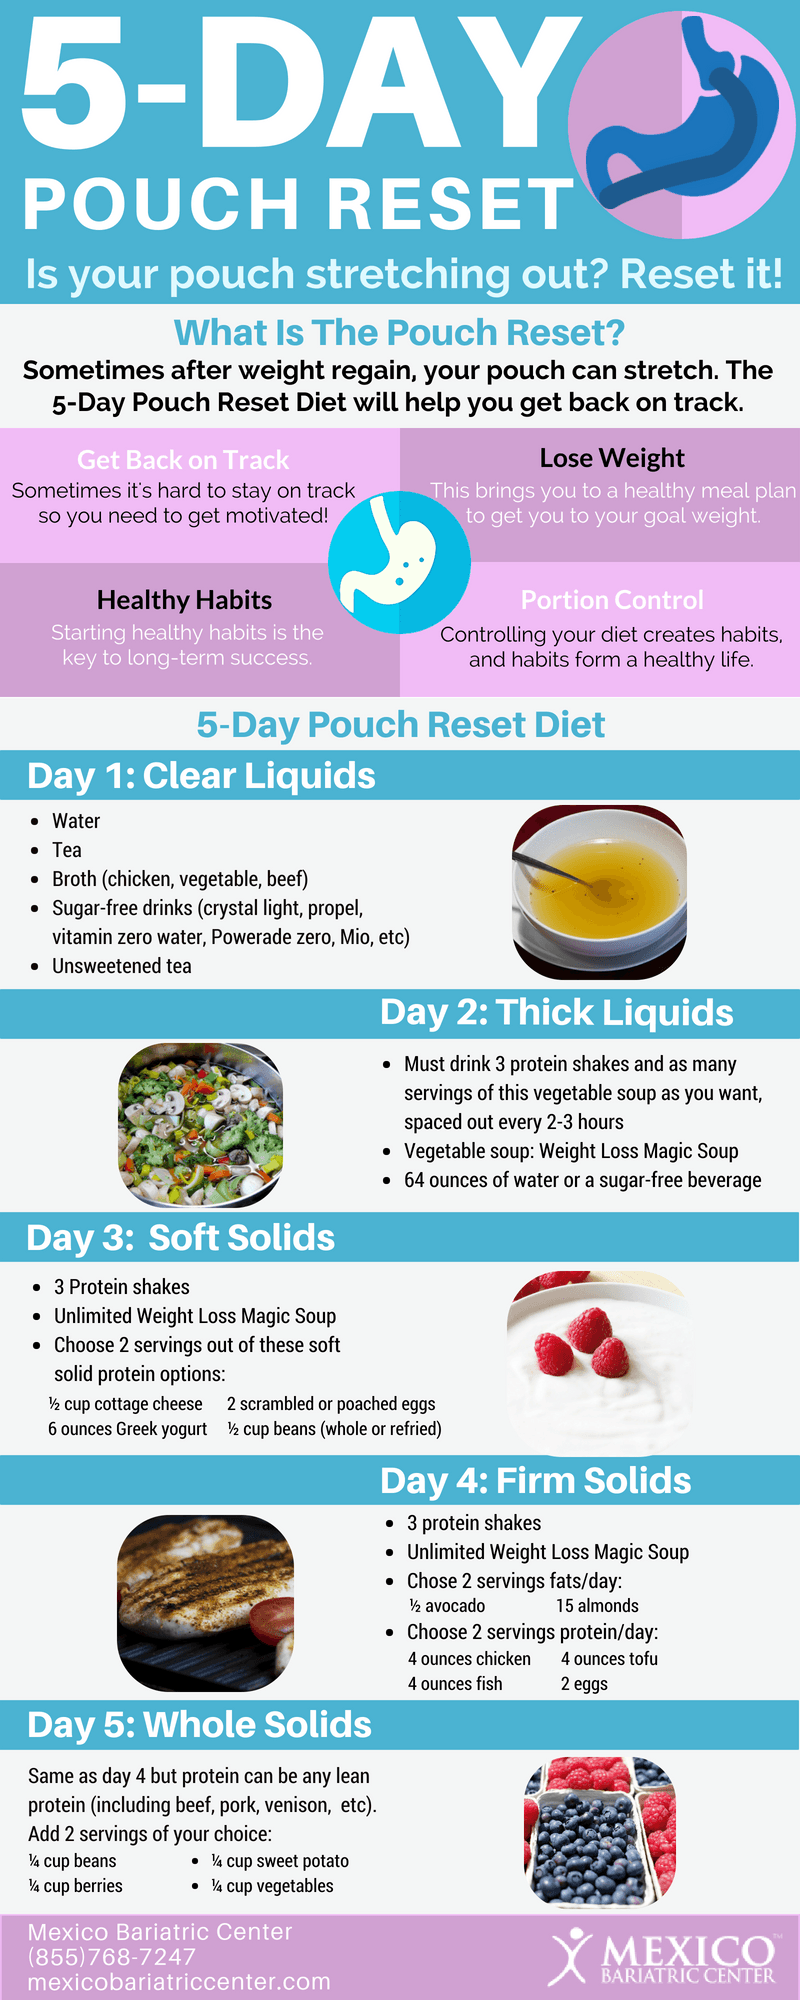 5-Day Pouch Reset: Lose Weight After Weight Gain